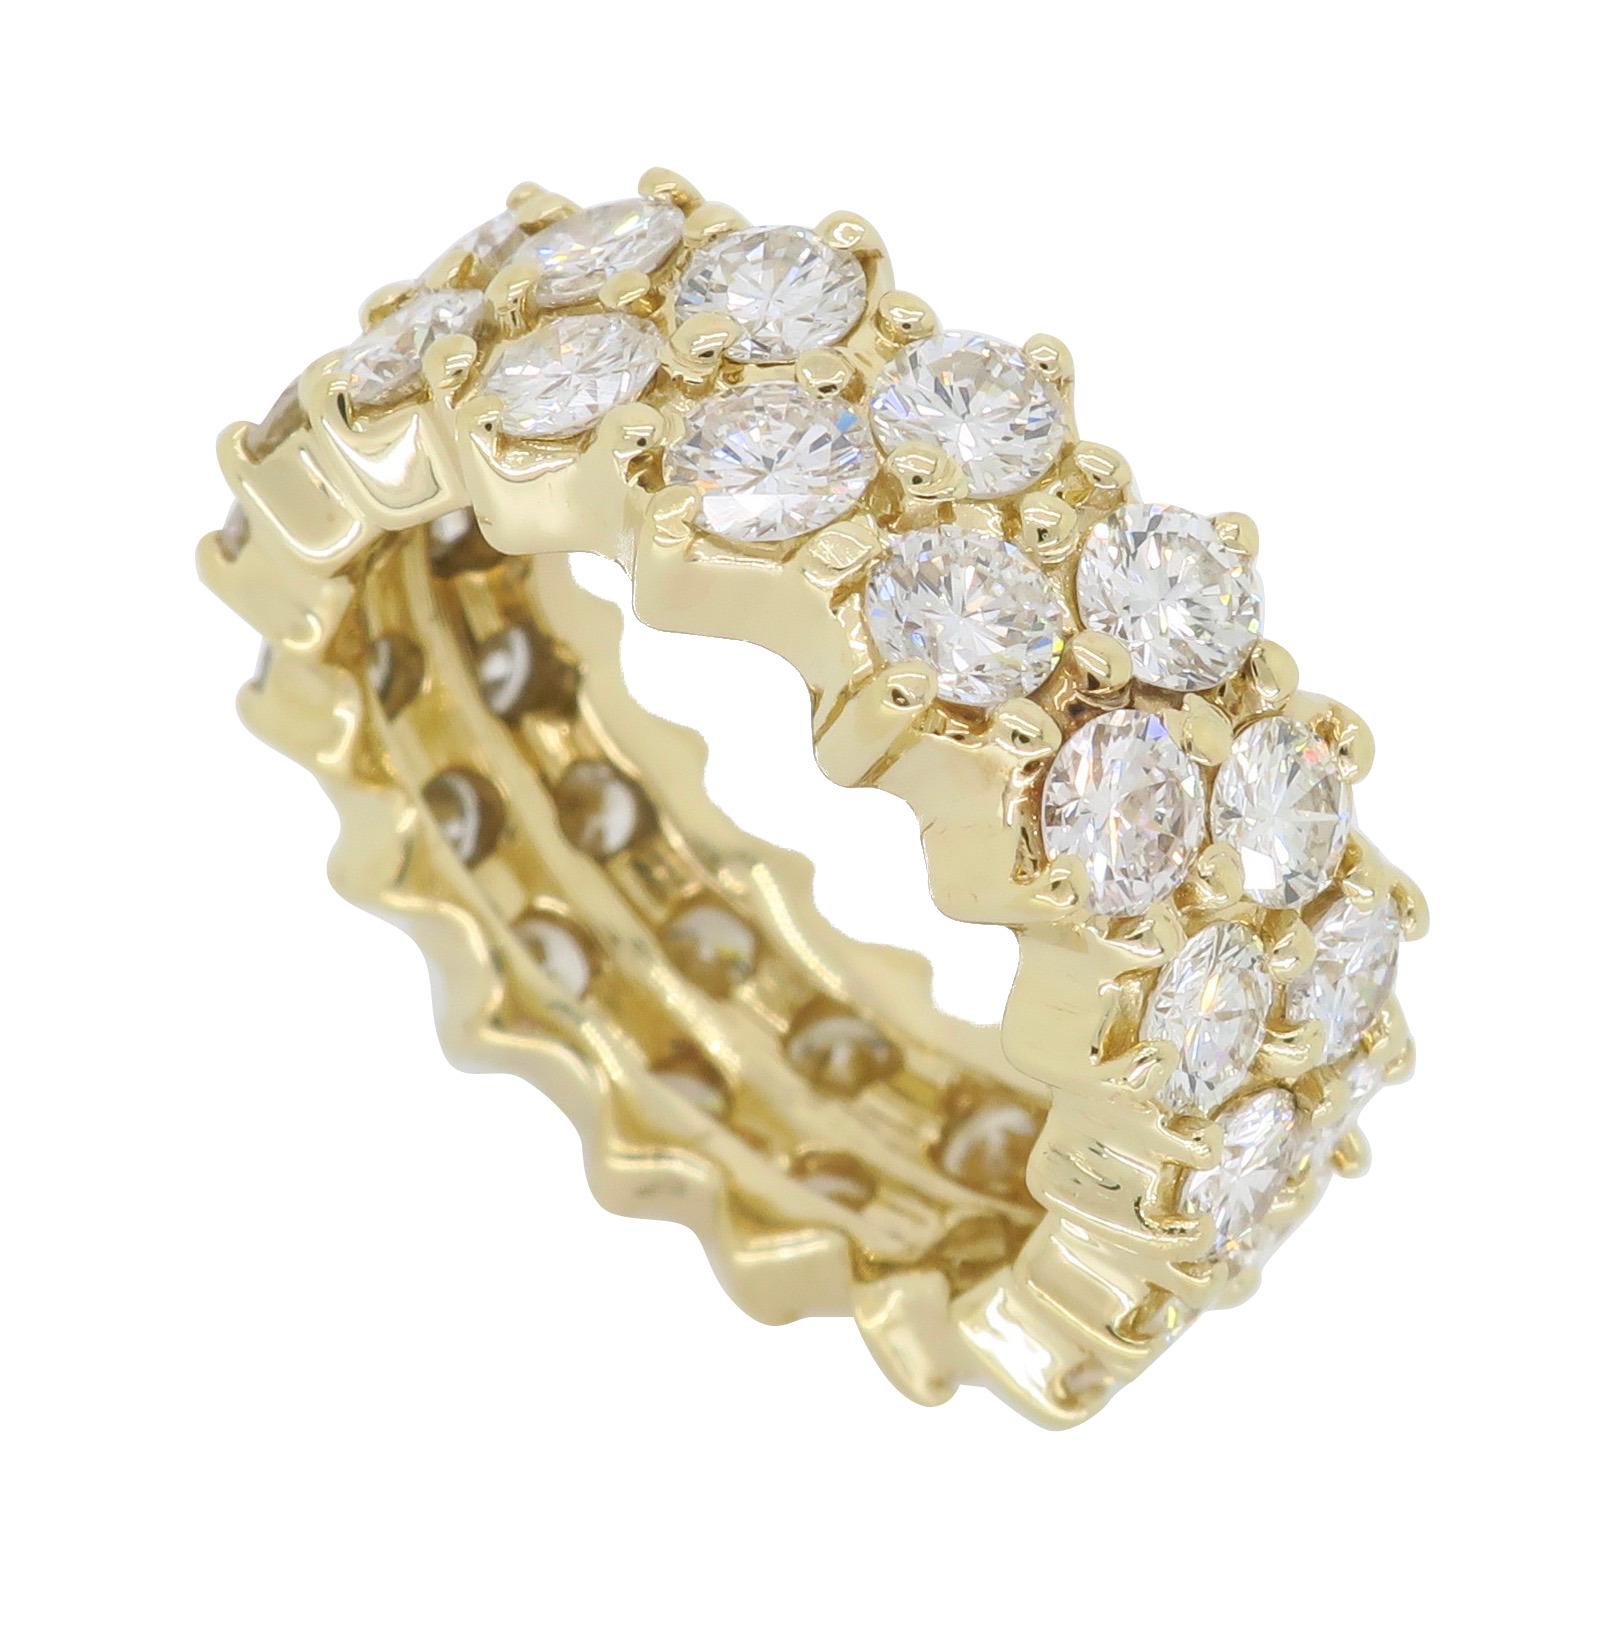 4.50 Carat Diamond Eternity Band Ring For Sale 2